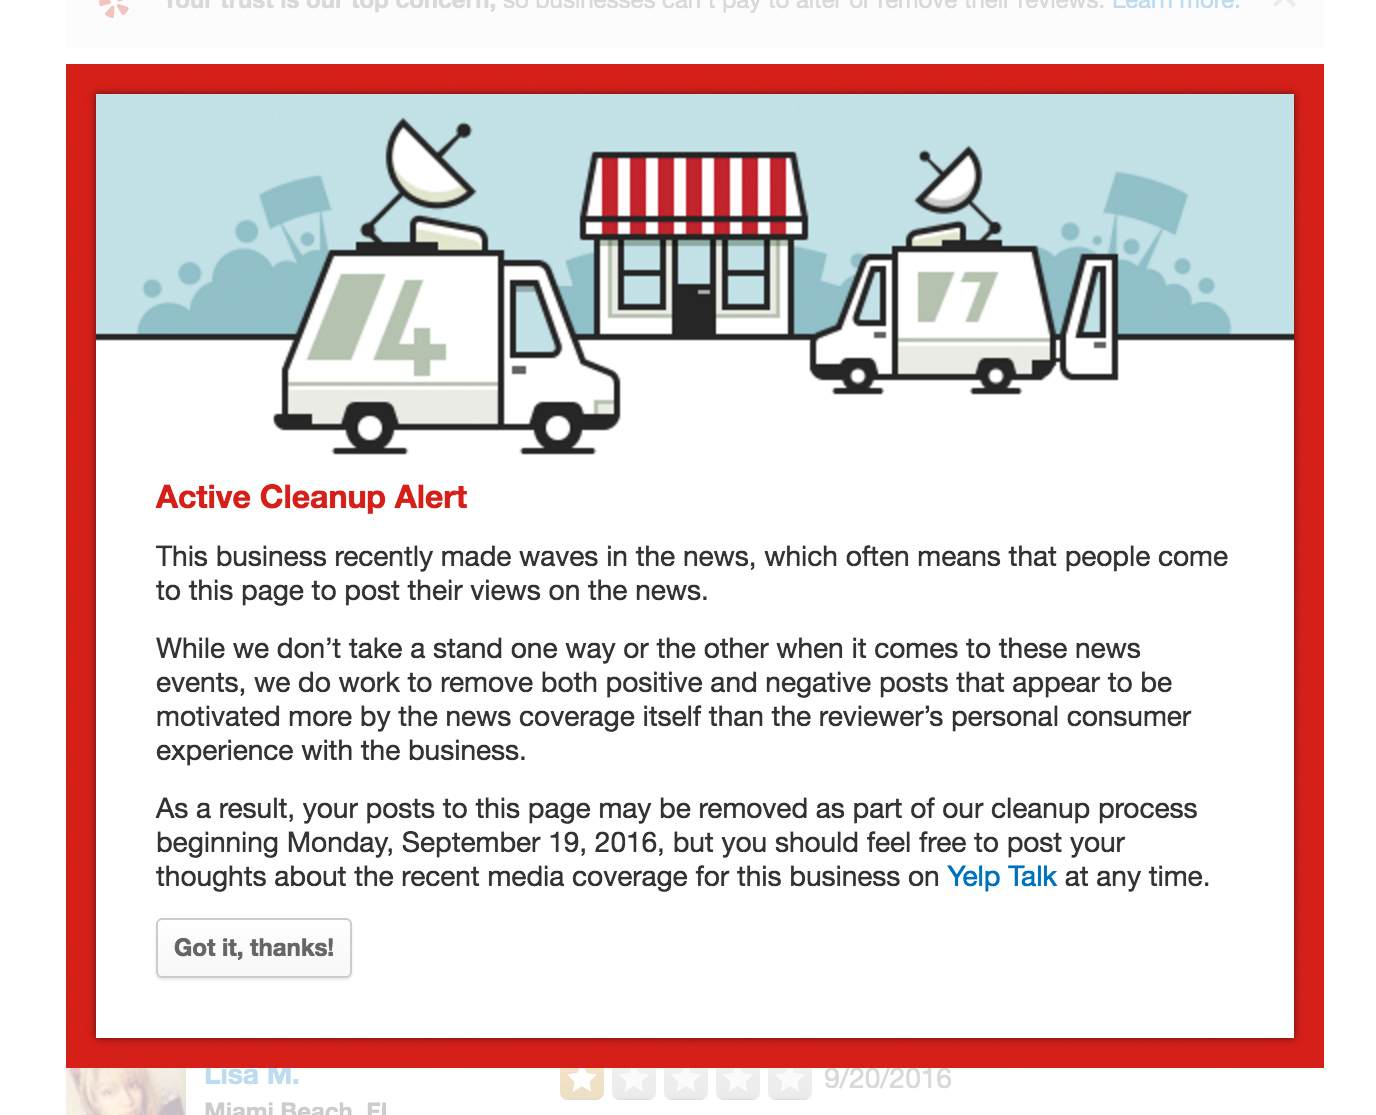 Airing political views through Yelp has become such a popular pastime that the site had to create a "cleanup" alert. A business undergoing a cleanup will have a large red box like this one at the top noting that the page is being closely monitored by Yelp staff.